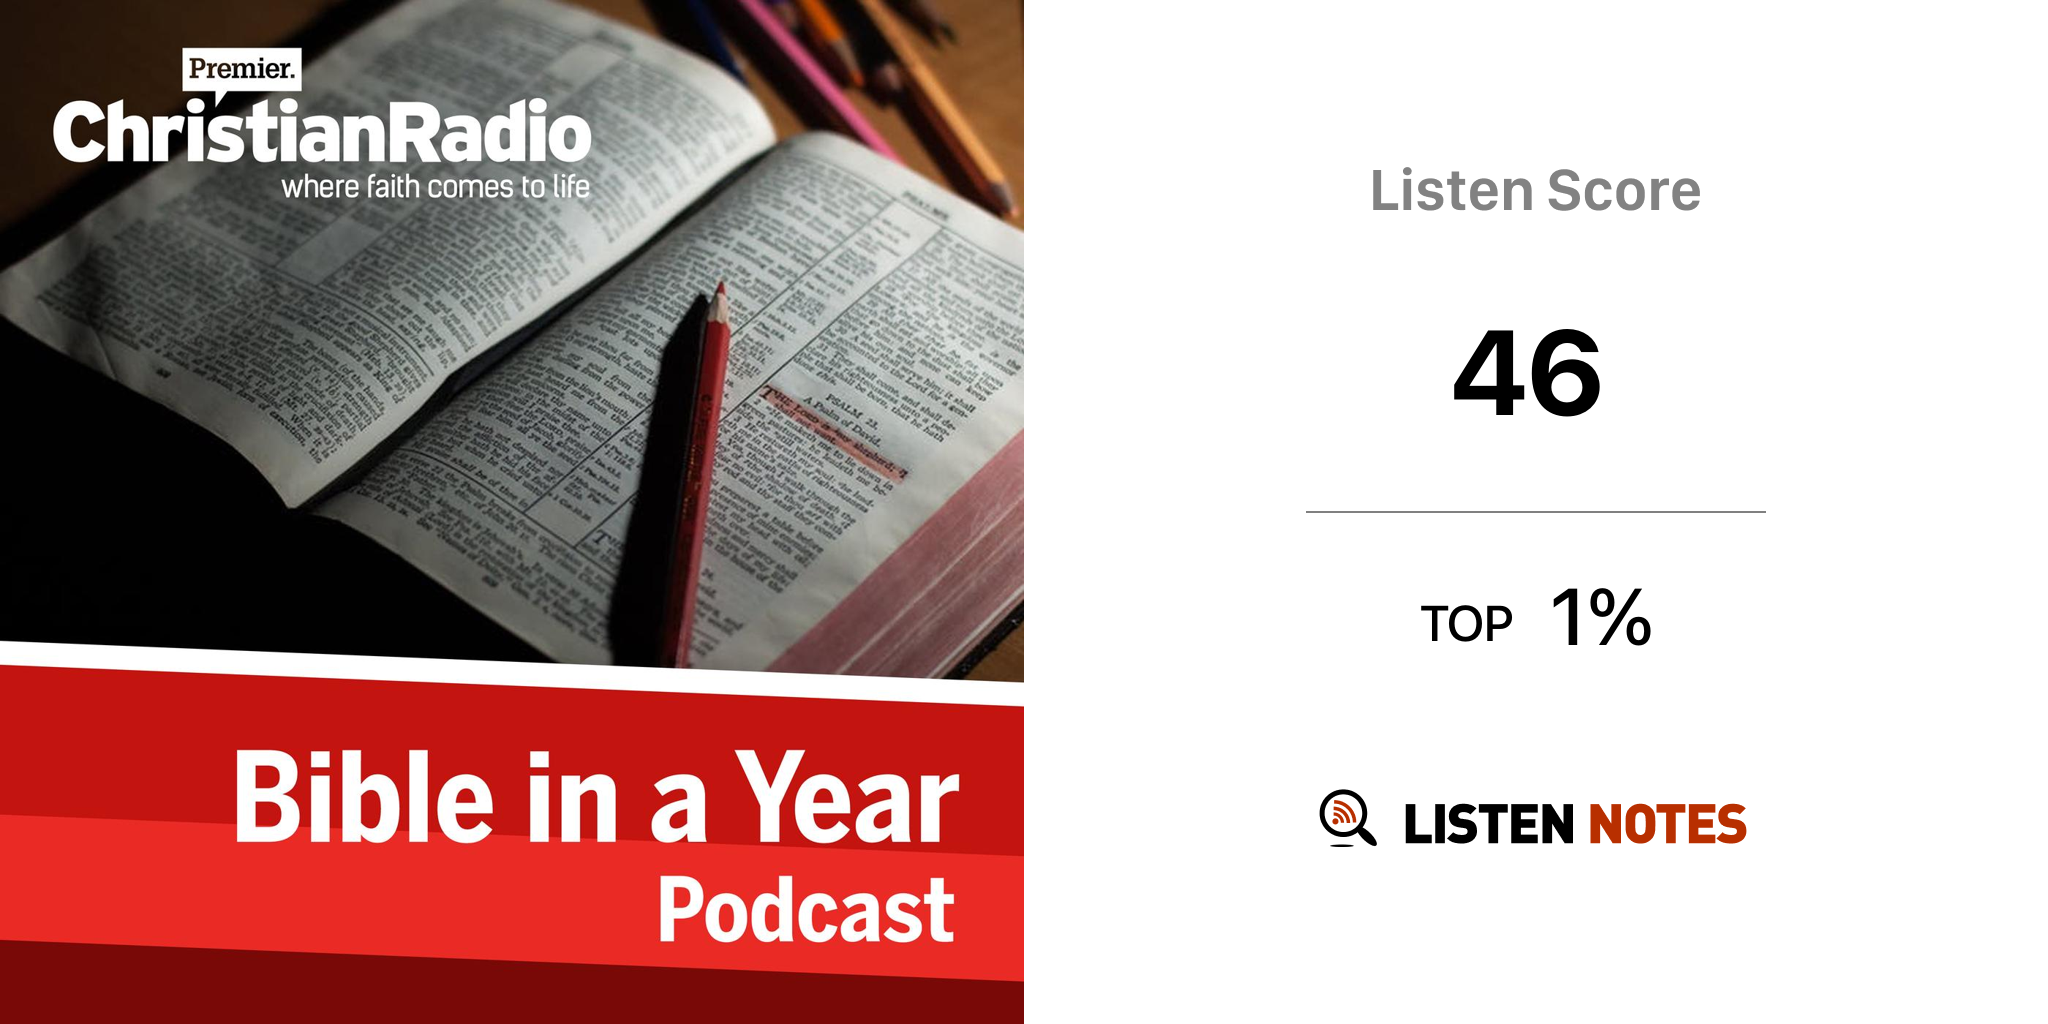 Bible in a Year (podcast) Premier Christian Radio Listen Notes